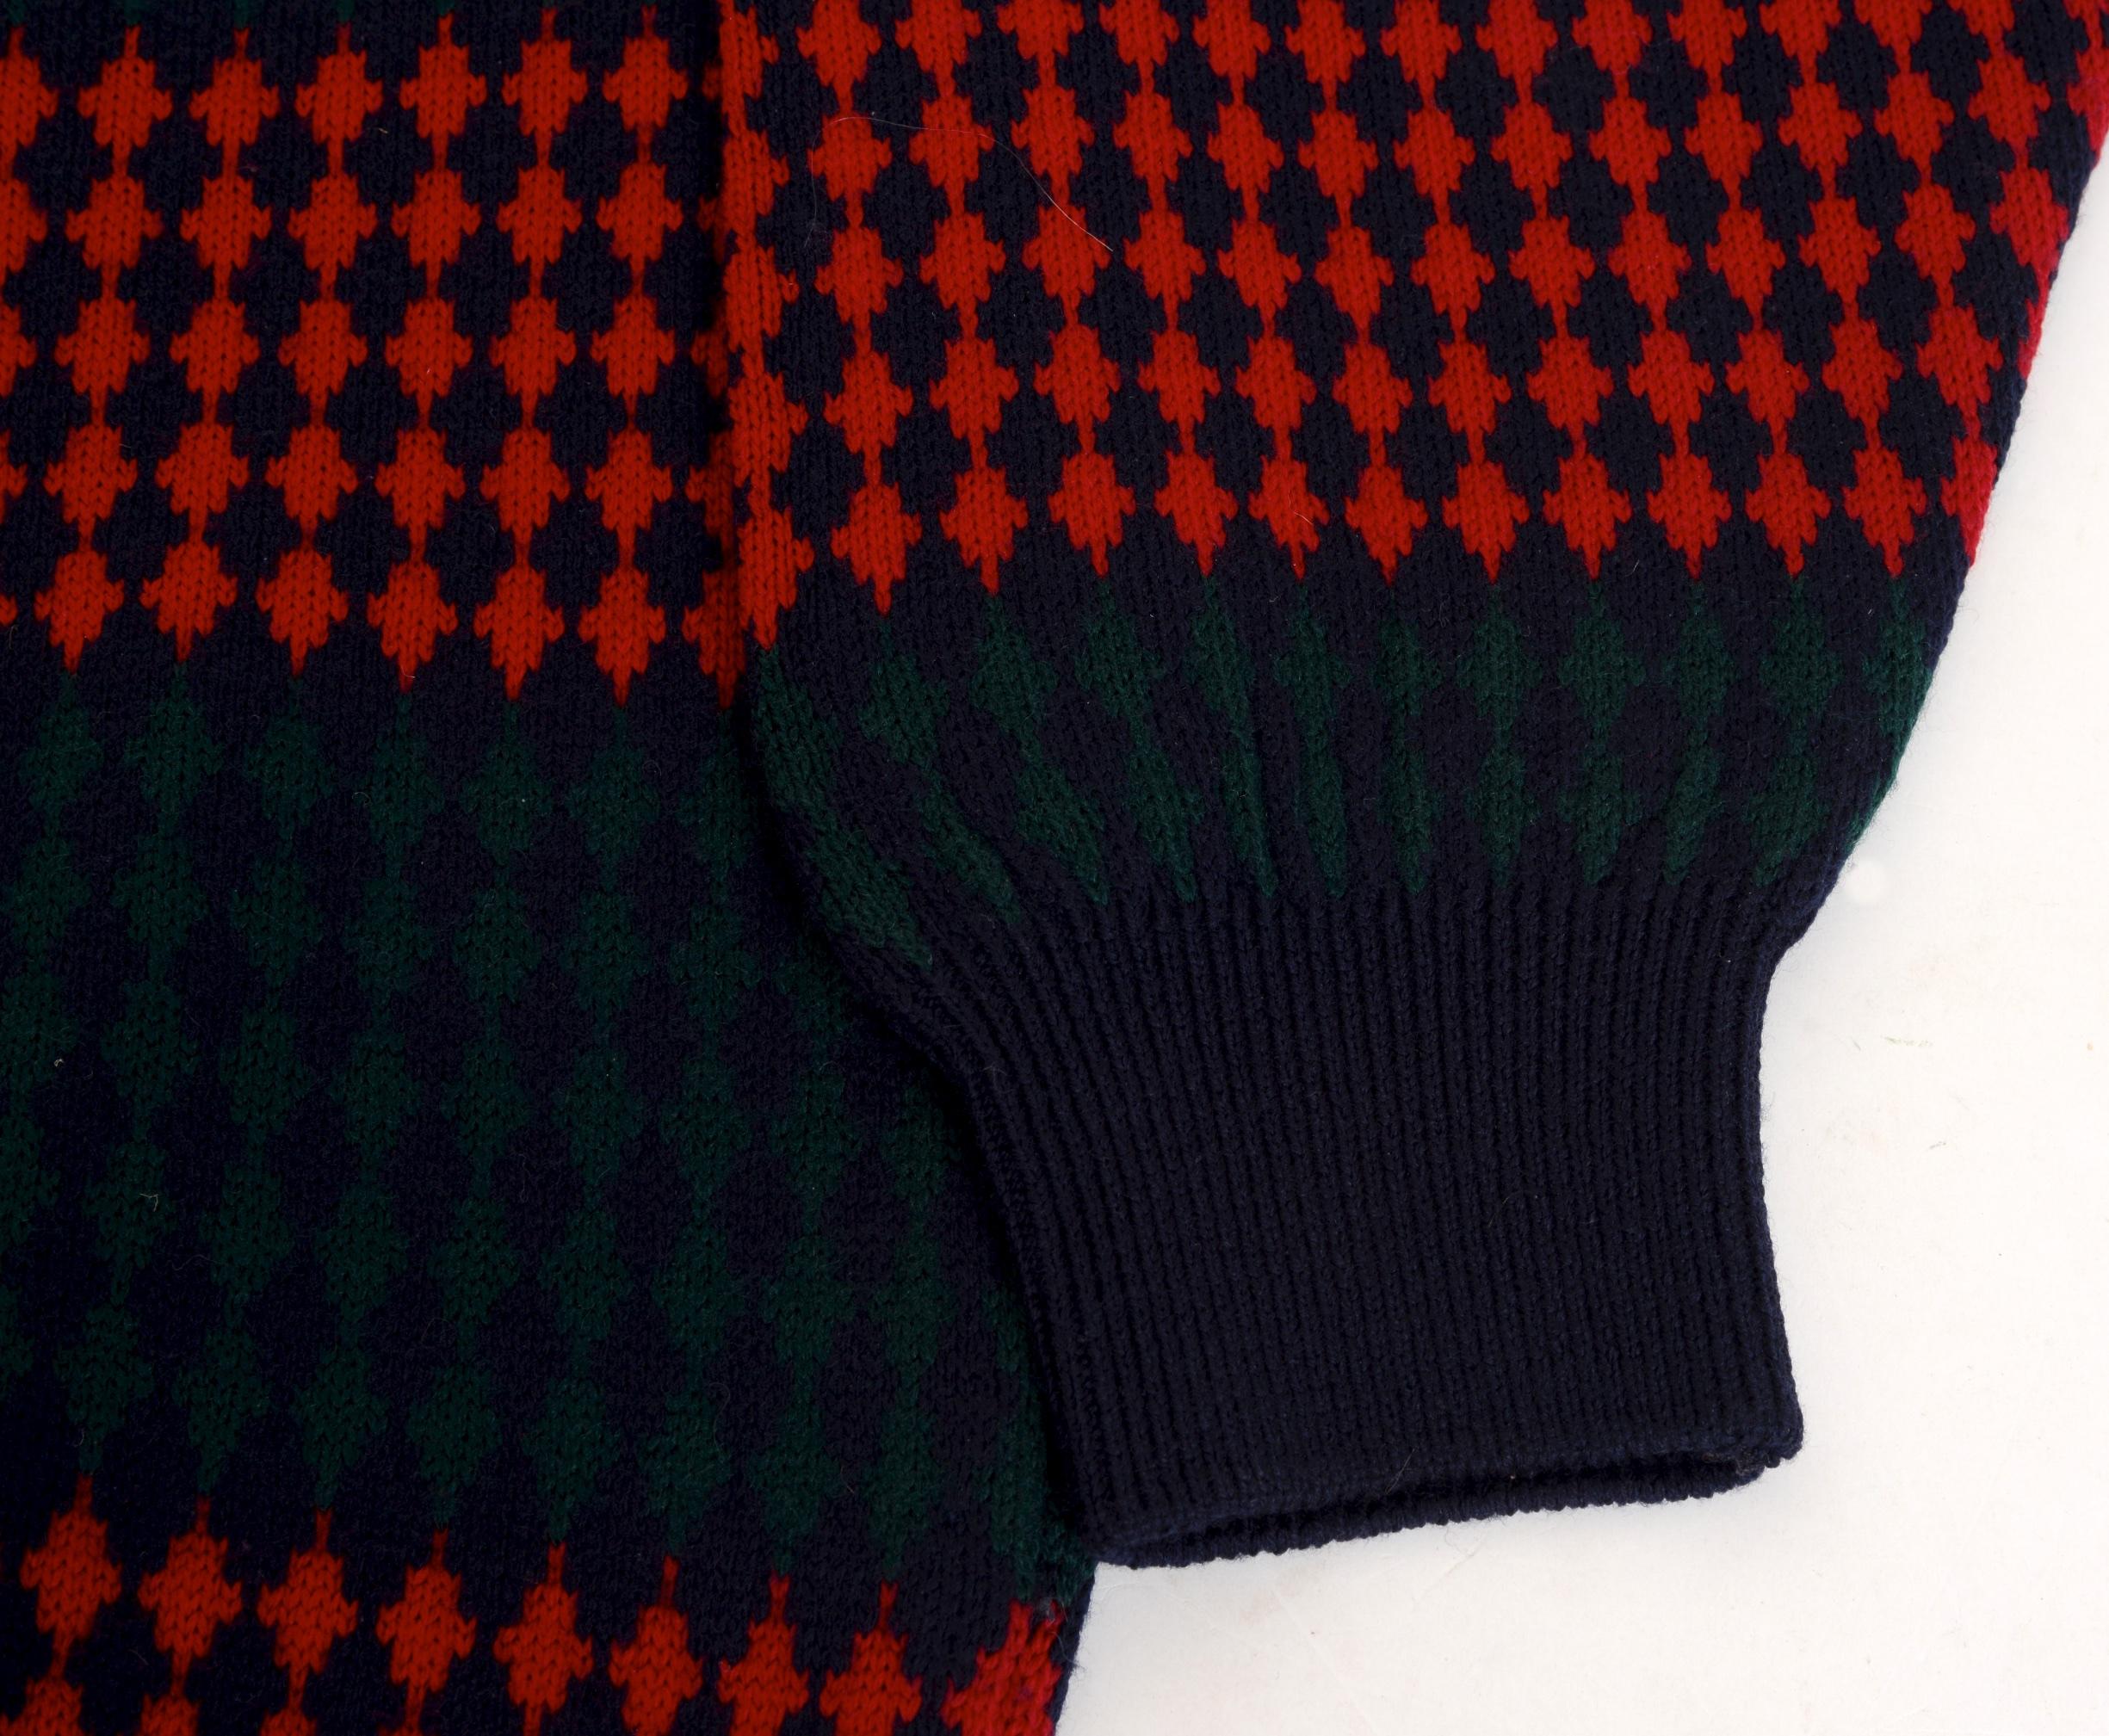 1980's Pringle of Scotland wool sweater has an alternating red/black checkerboard, red/green horizontal stripe throughout. The pullover has a solid black knit rib around the neck, sleeve cuffs, and hem. 100% lambswool.

Additional measurements-